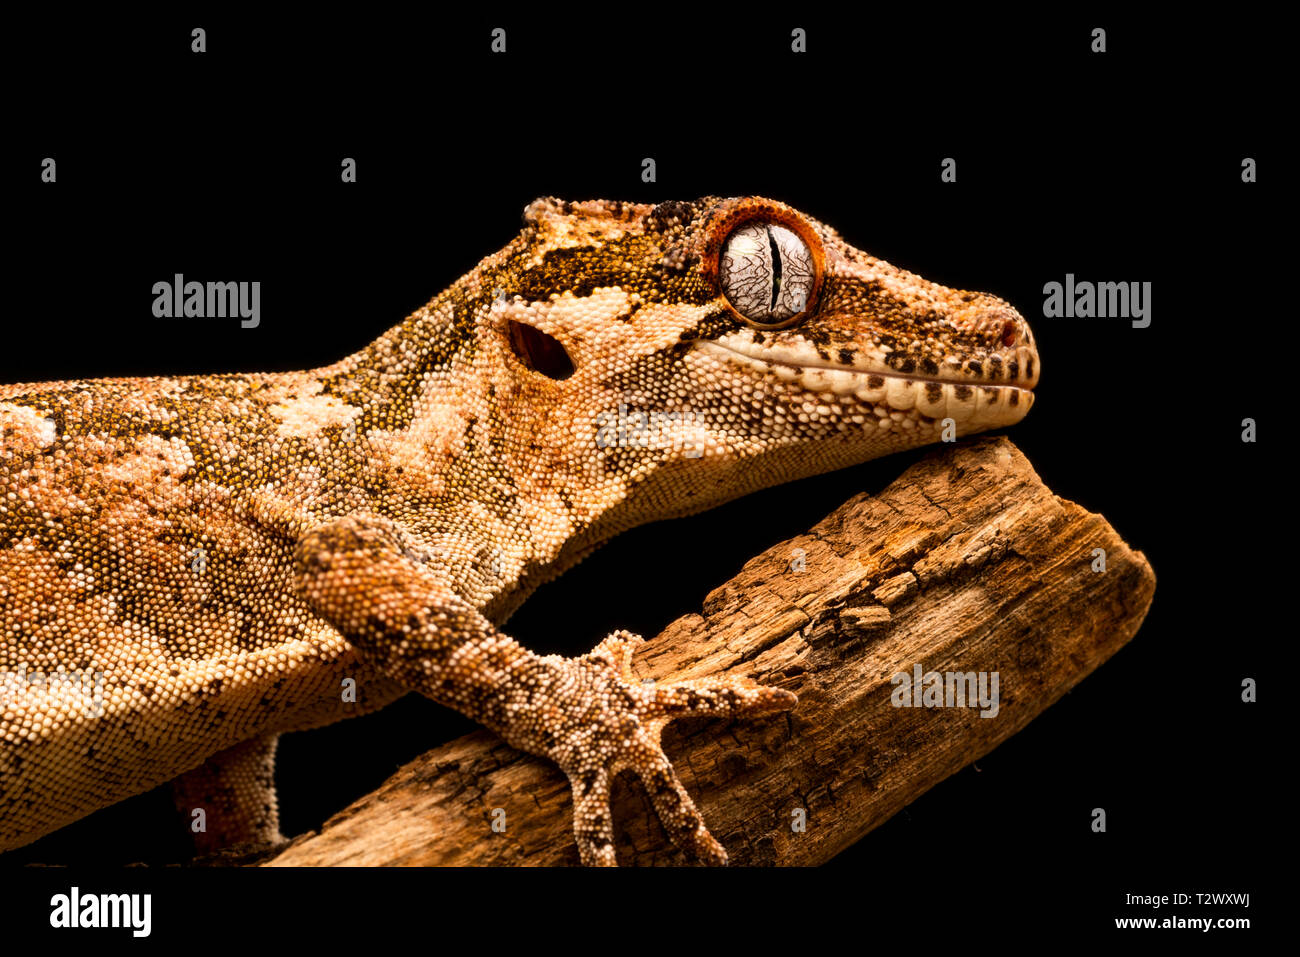 Gargoyle gecko (Rhacodactylus auriculatus) or New Caledonian bumpy gecko is a species of gecko found only on the southern end of New Caledonia island. Stock Photo